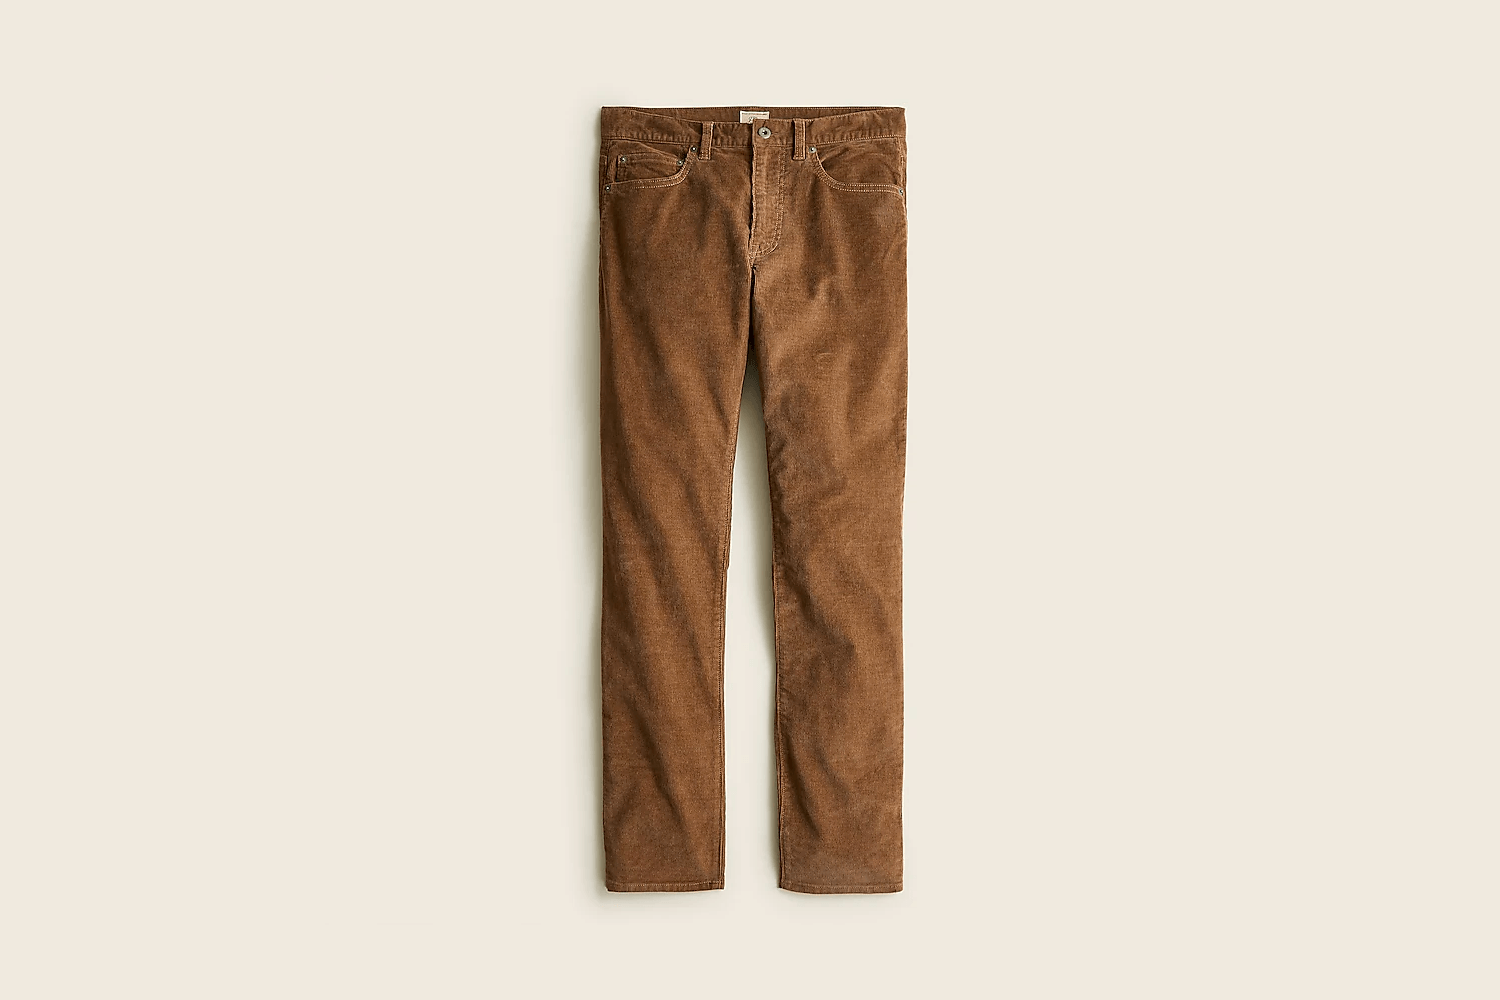 770™ Straight-fit pant in corduroy